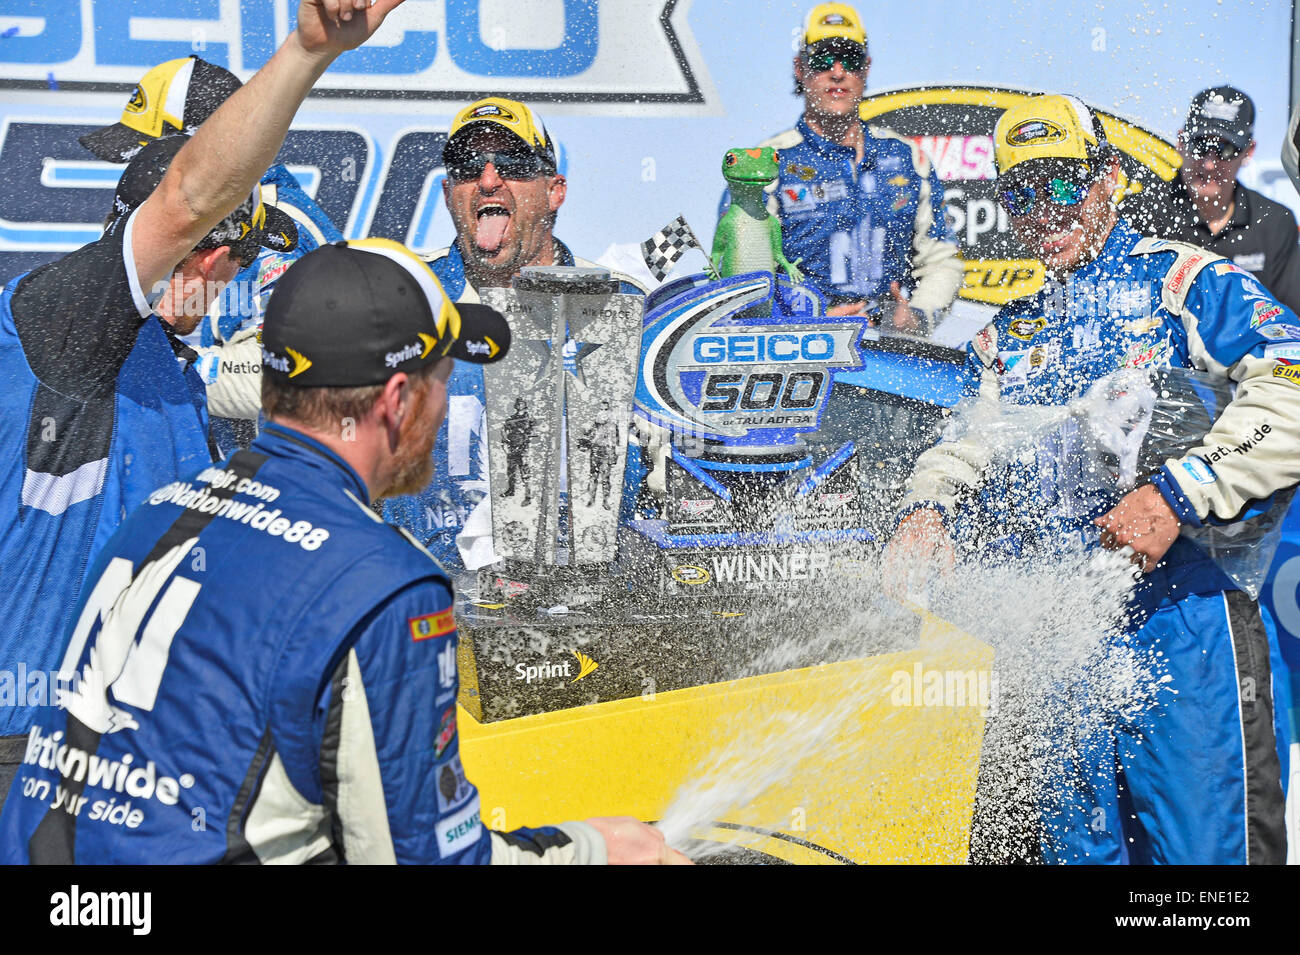 Talladega, AL, USA. 3rd May, 2015. Talladega, AL - May 03, 2015: Dale Earnhardt Jr. (88) celebrates his victory by spraying champagne on his team mates of the GEICO 500 in victory lane at Talladega Superspeedway in Talladega, AL. Credit:  csm/Alamy Live News Stock Photo